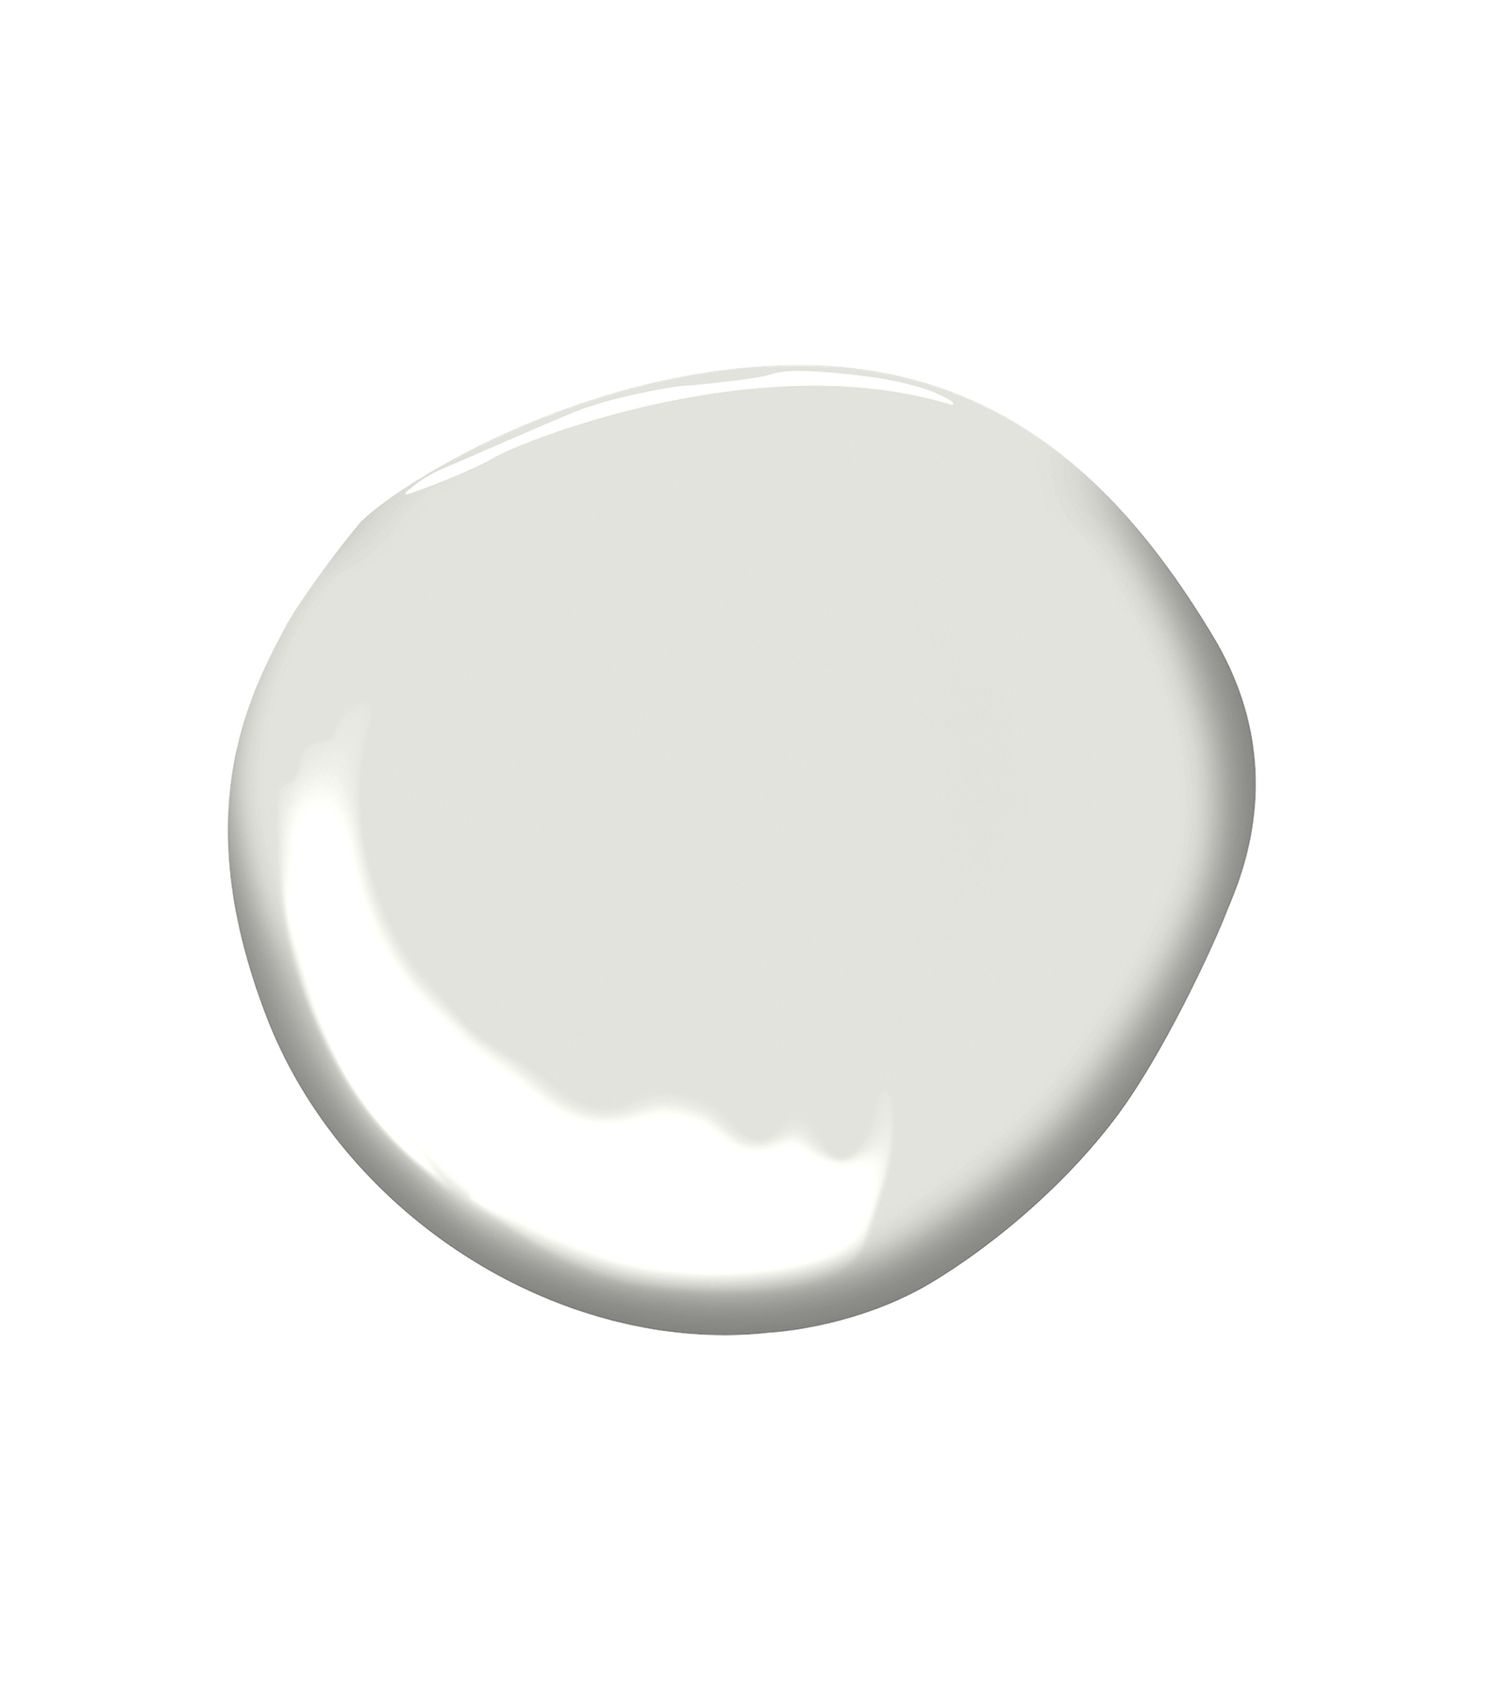 Paper White by Benjamin Moore